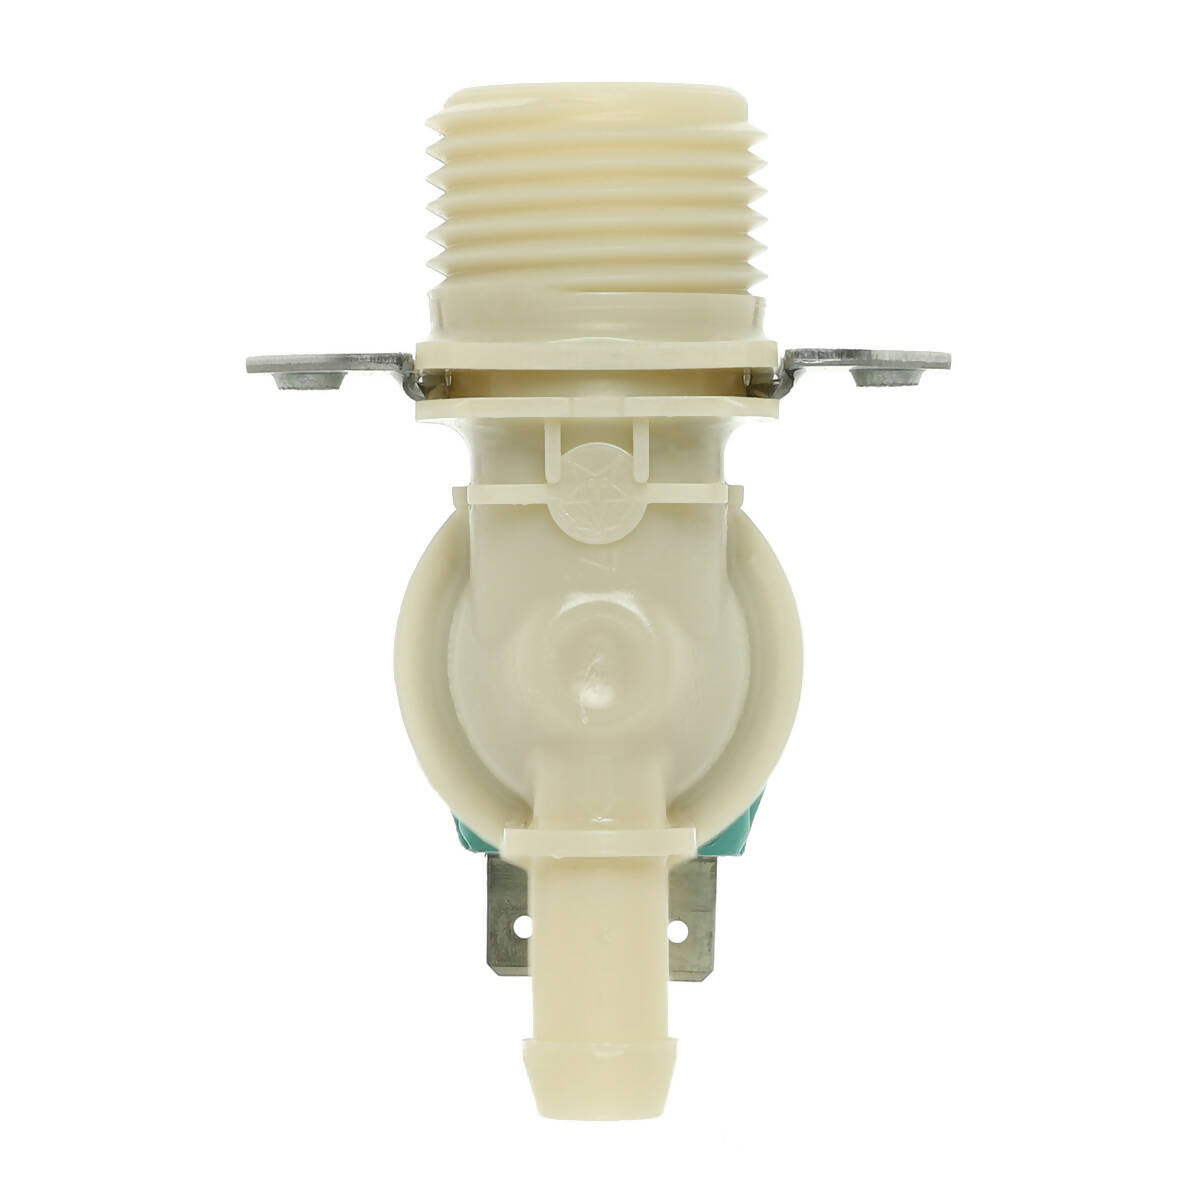 G.E. Washer Single Water Valve - WH13X27119, Replaces: 4588086 AP6328290 PS12343367 EAP12343367 PD00085595